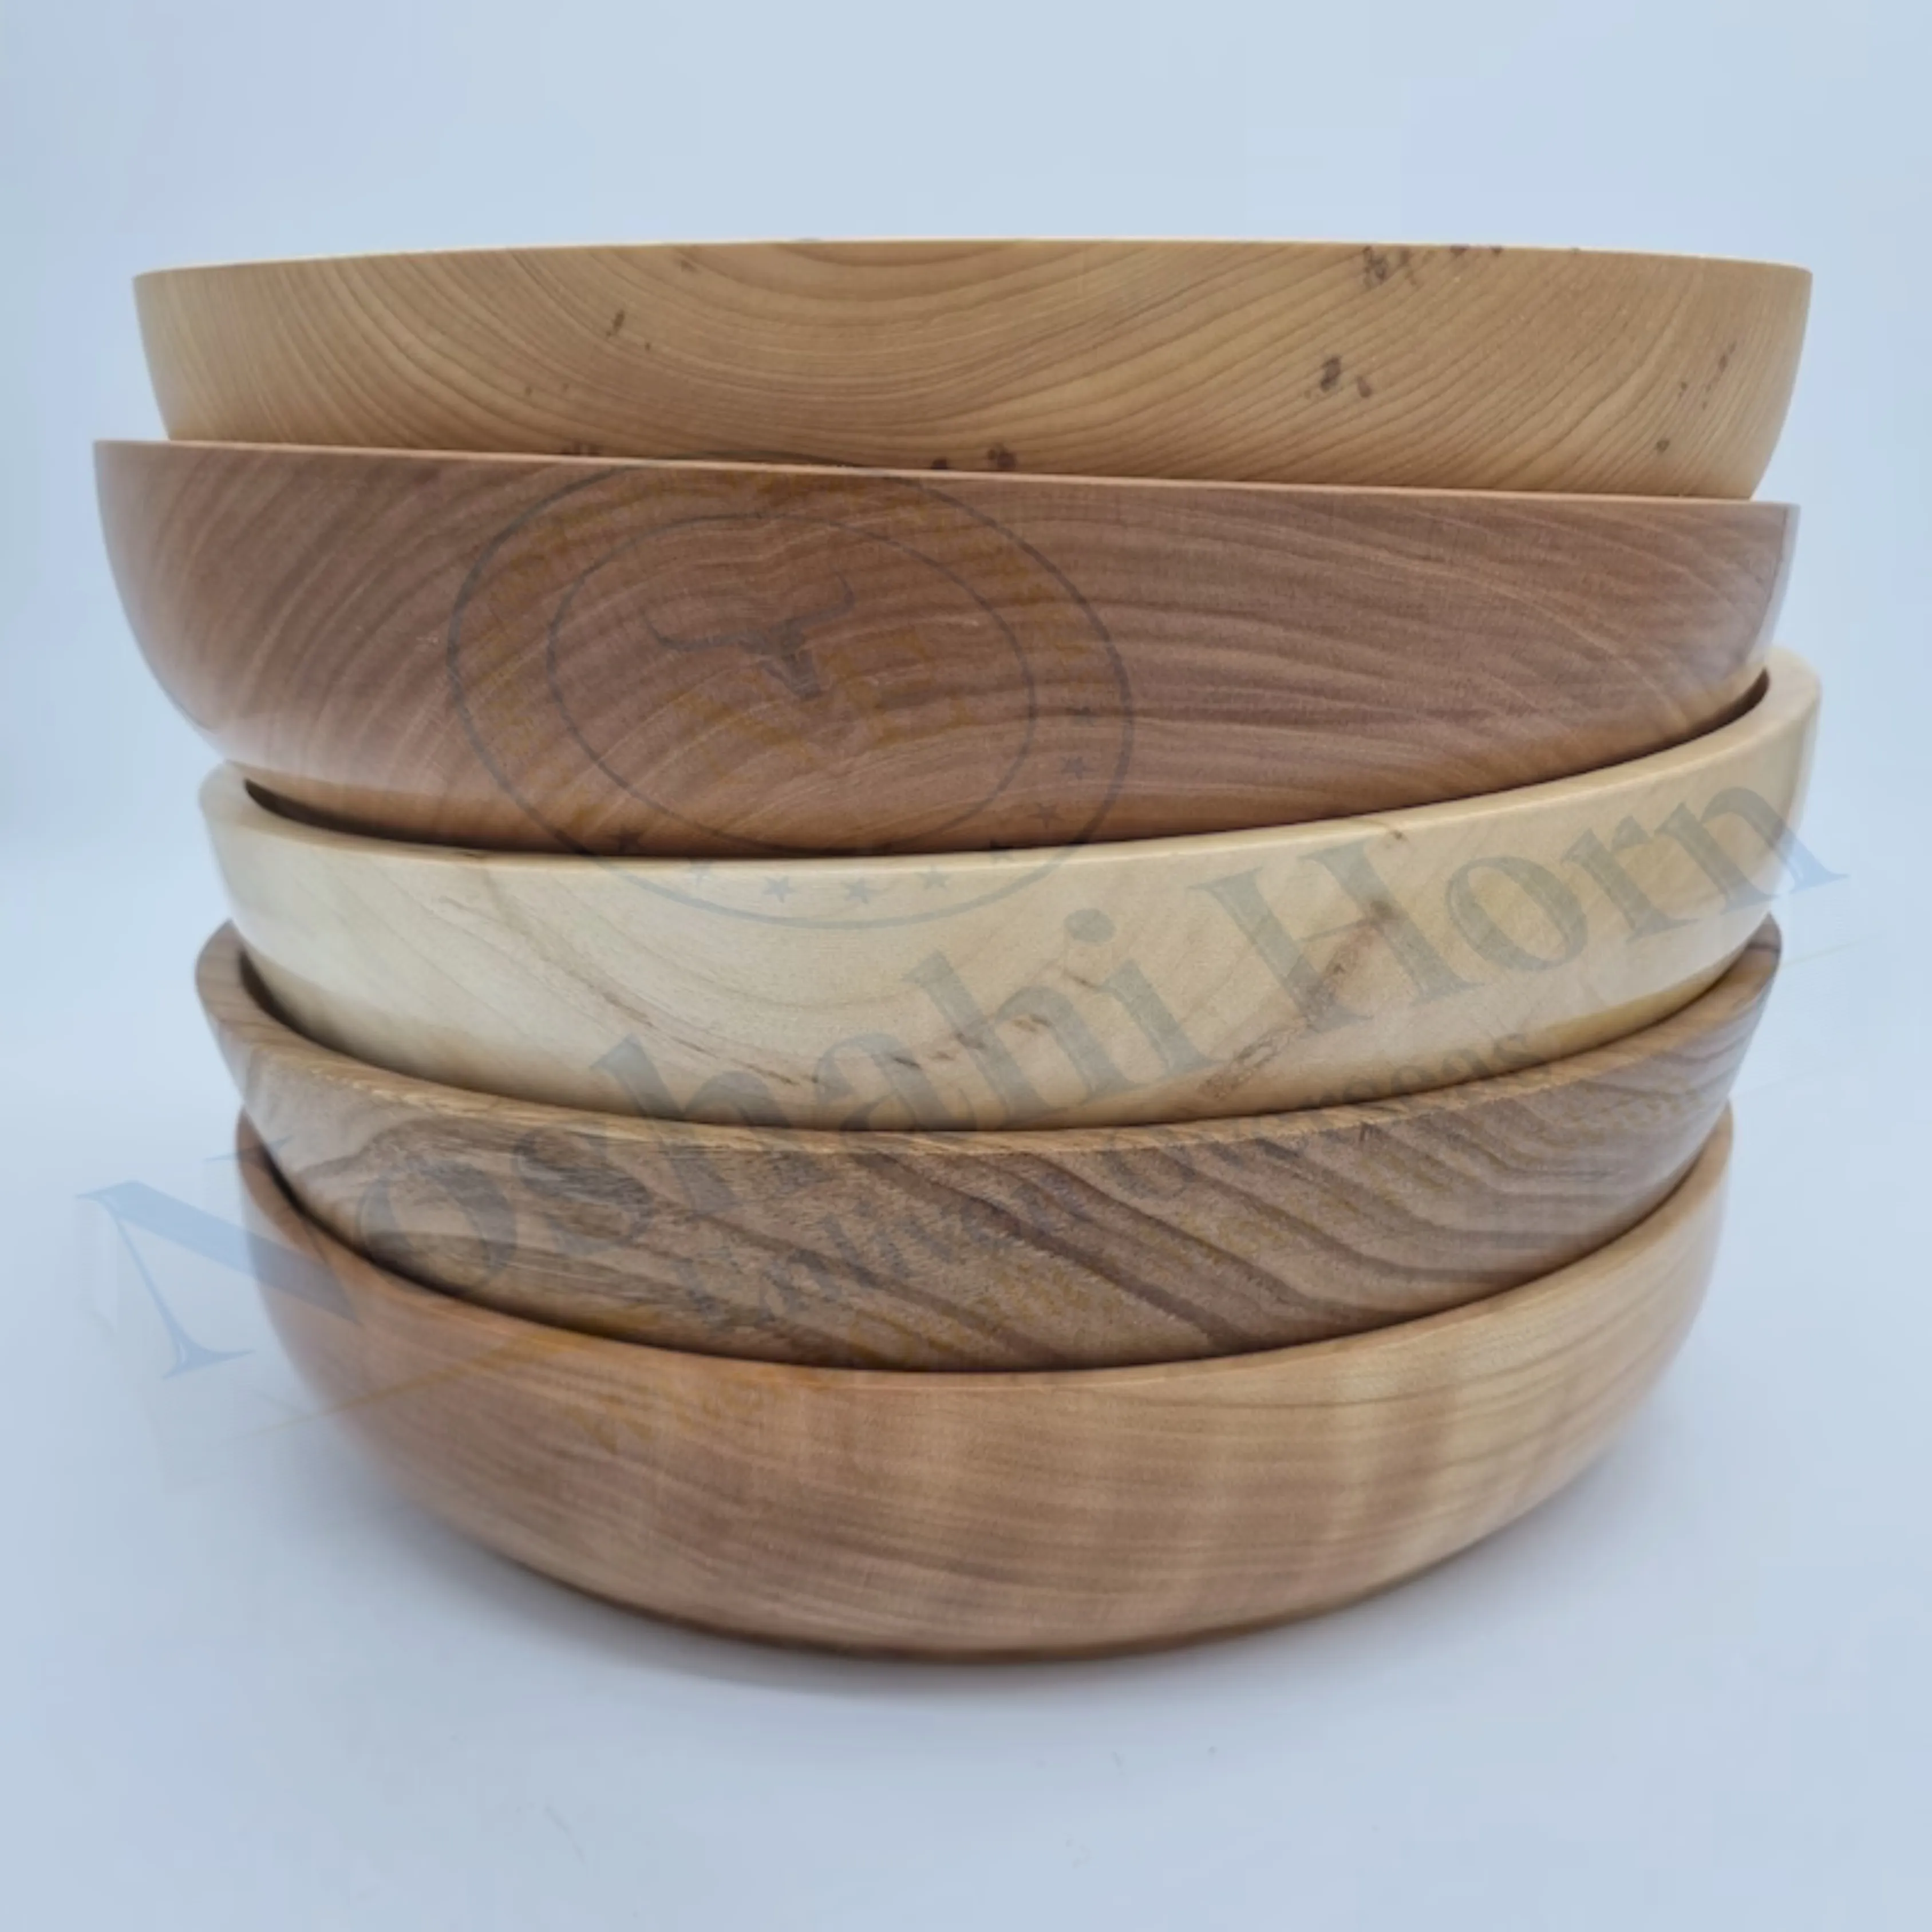 Polished round Bamboo Wood Tray Custom Food Storage Platters for Serving Food Bathroom Decor with Horn Theme